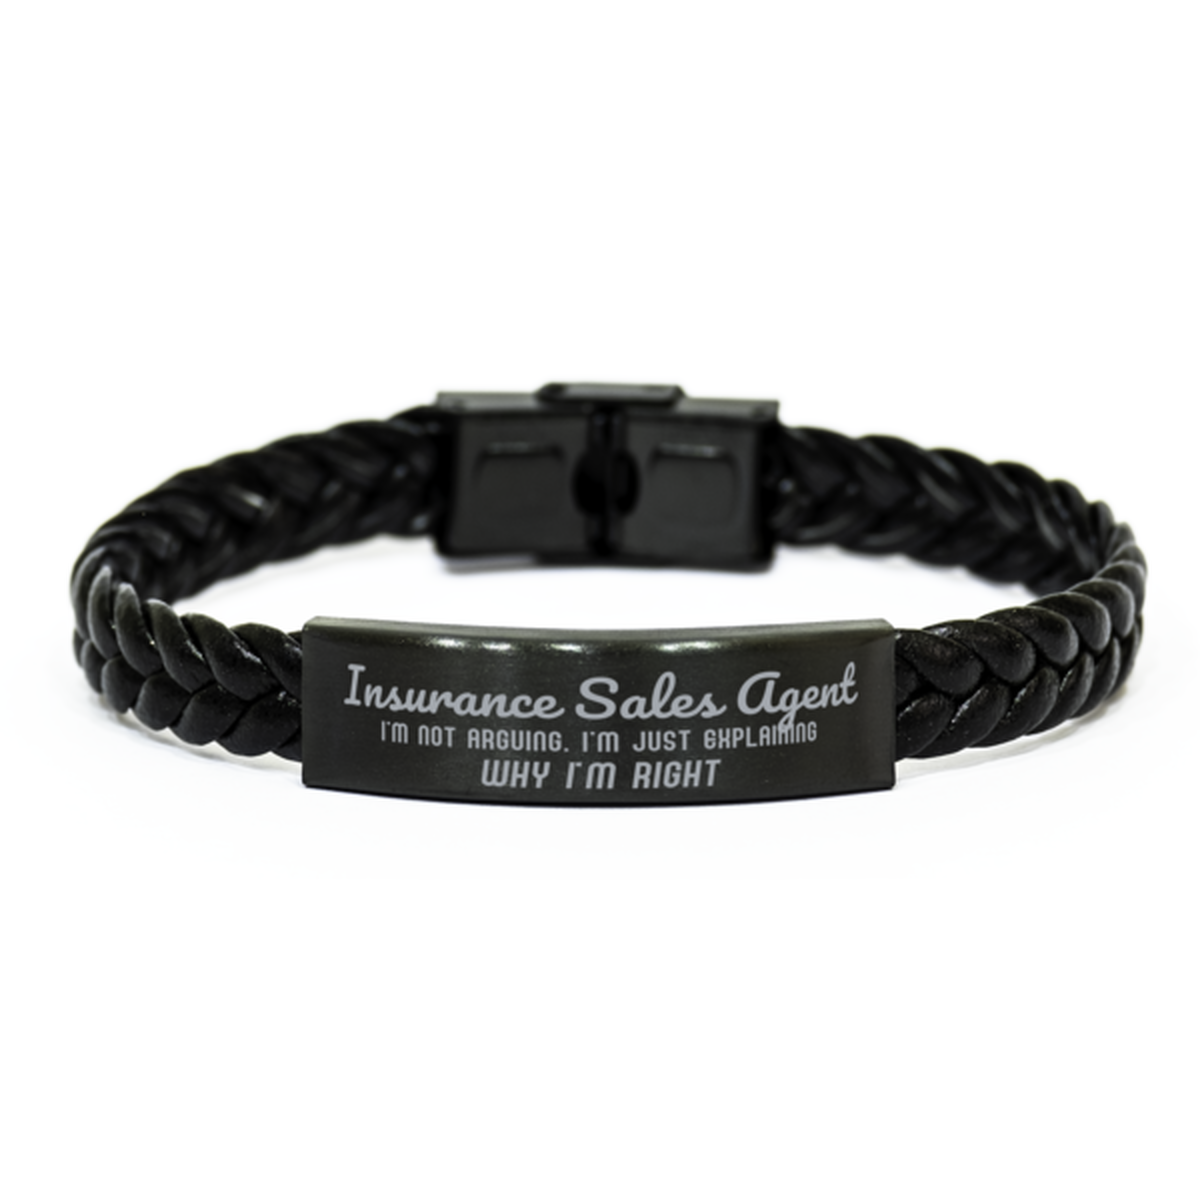 Insurance Sales Agent I'm not Arguing. I'm Just Explaining Why I'm RIGHT Braided Leather Bracelet, Graduation Birthday Christmas Insurance Sales Agent Gifts For Insurance Sales Agent Funny Saying Quote Present for Men Women Coworker